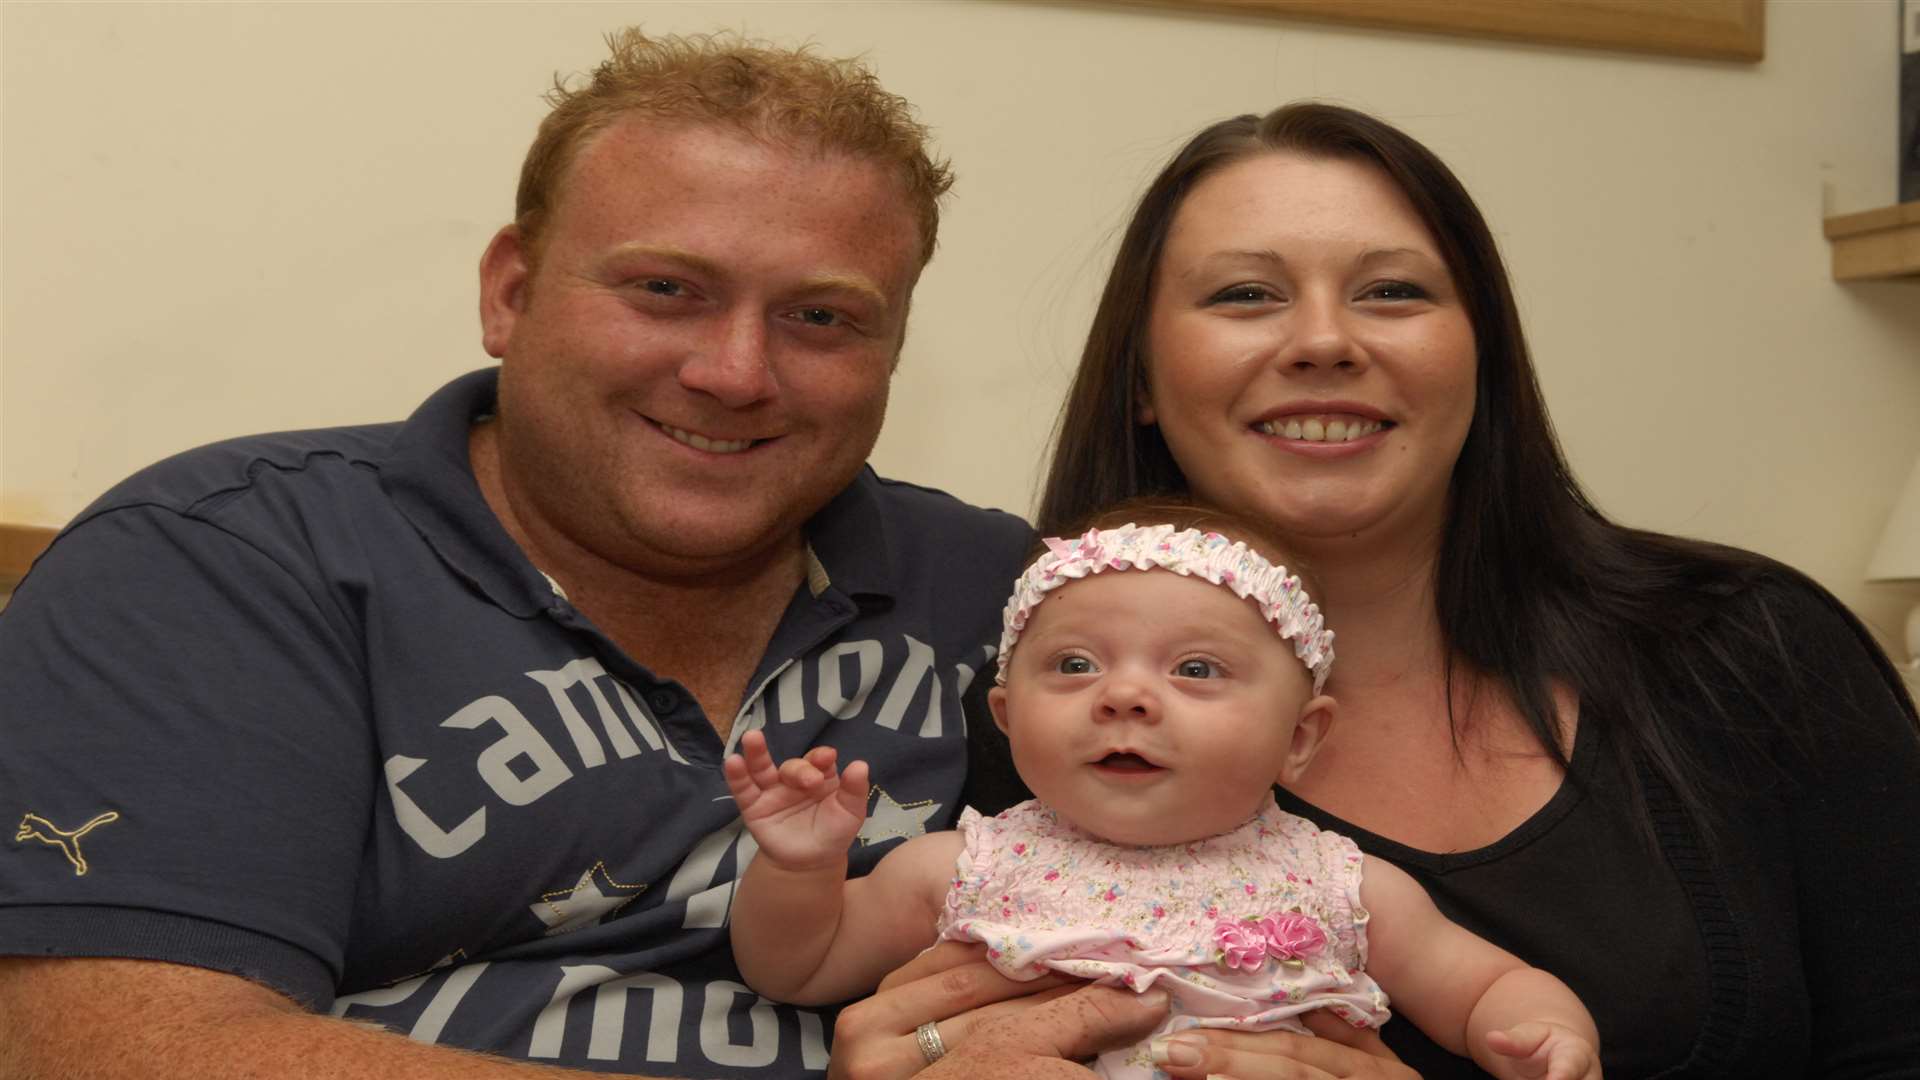 David "Dazy" Saunders and his wife, Kelly, with their daughter Daisy-Mae, who suffered from meningitis as a baby